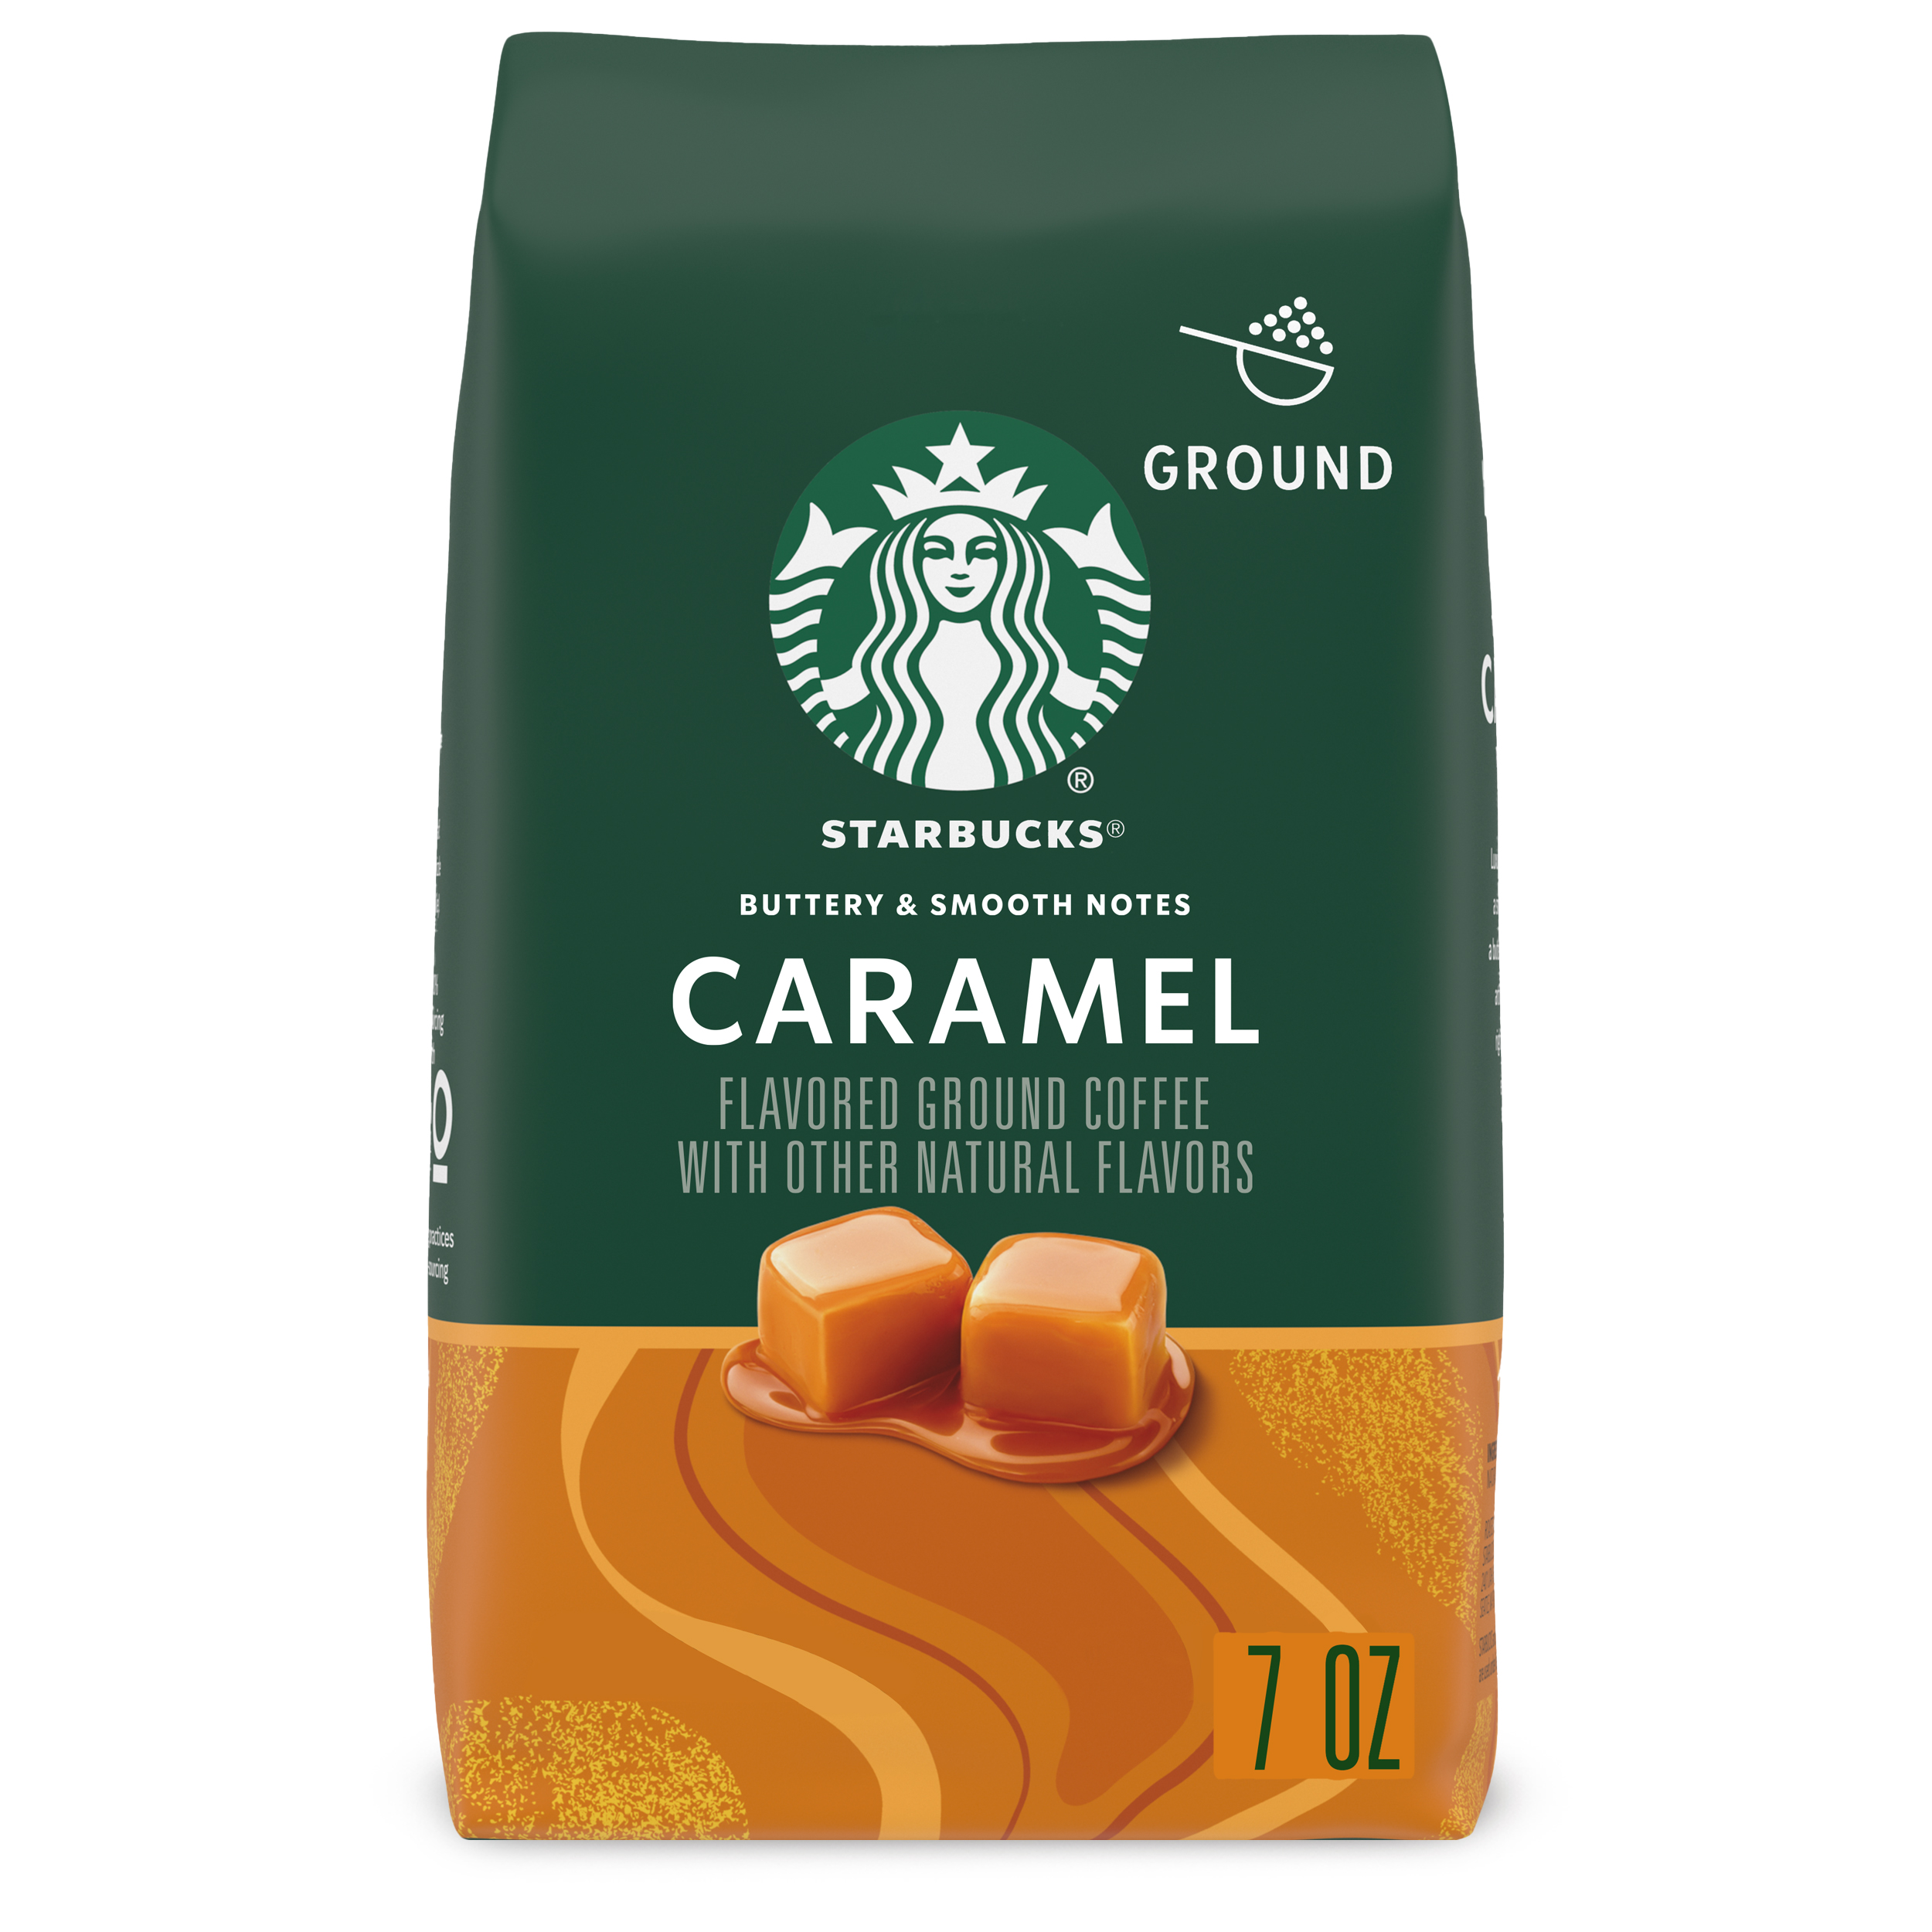 Starbucks Caramel Flavored, Ground Coffee, Naturally Flavored, 7 oz - image 1 of 8